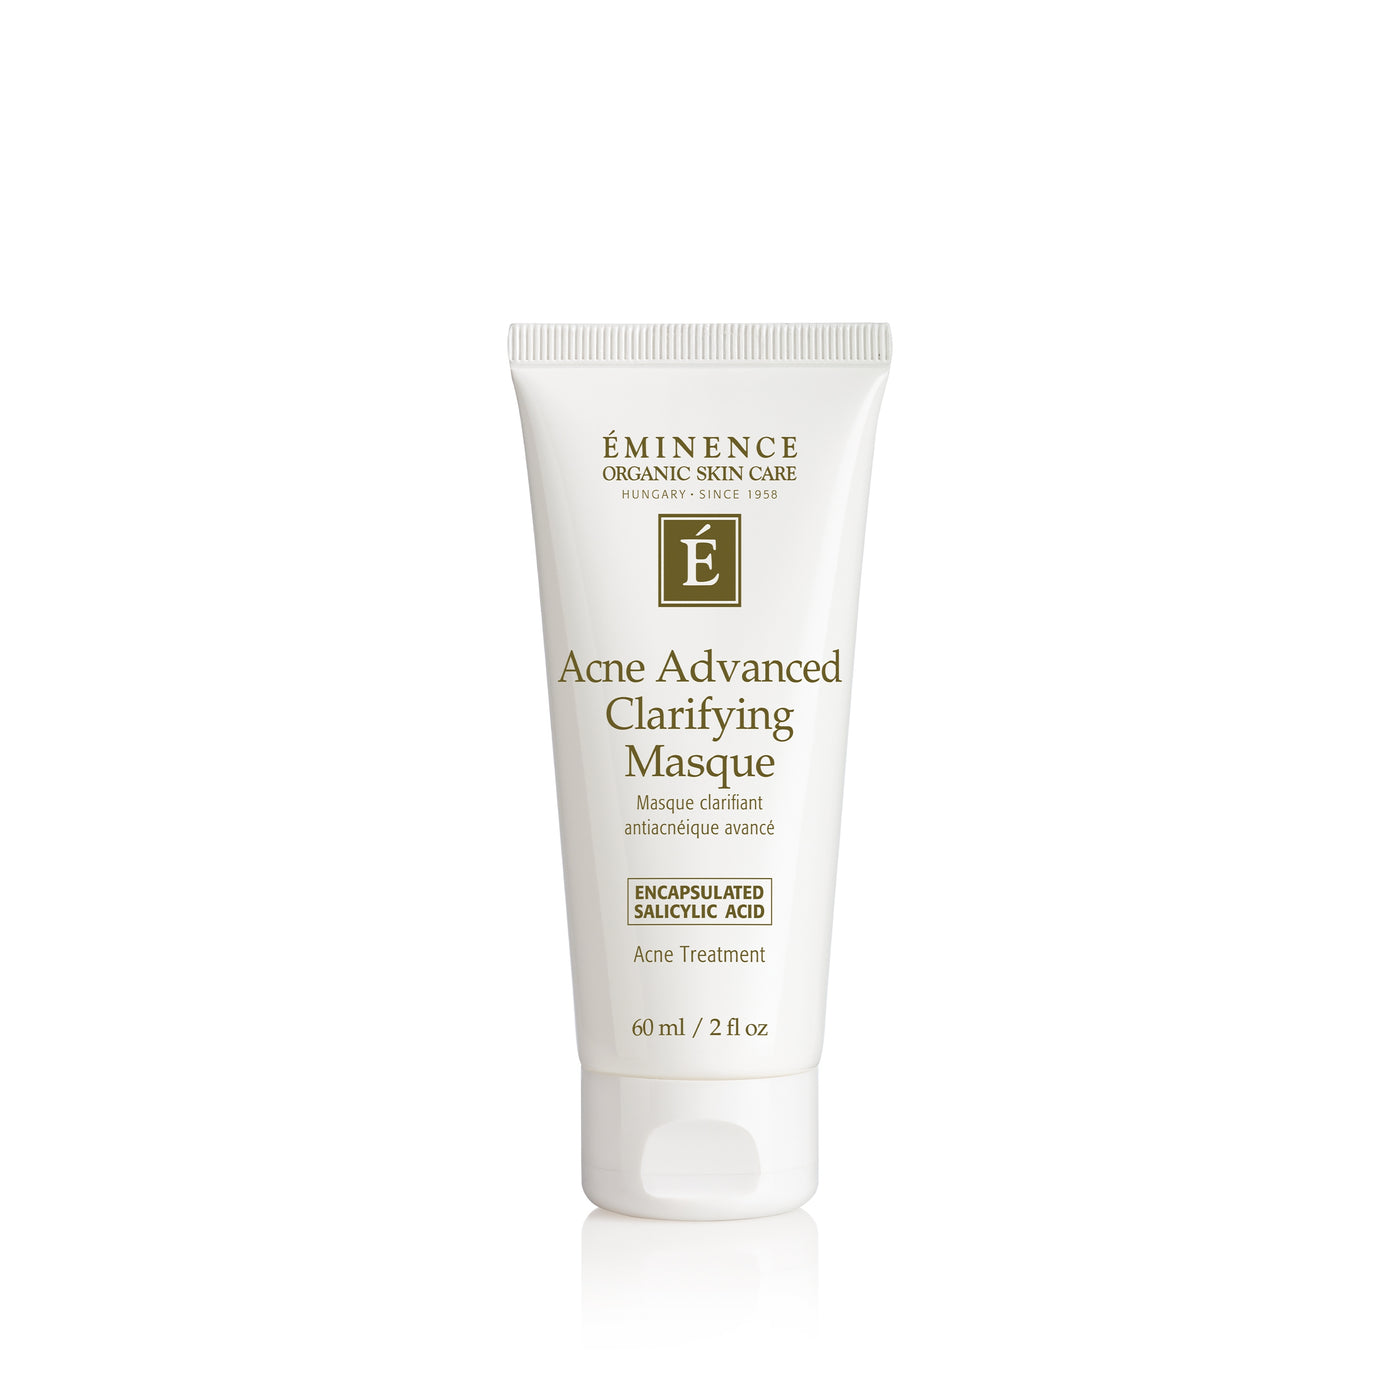 Acne Advanced Clarifying Masque - Radiance Clean Beauty